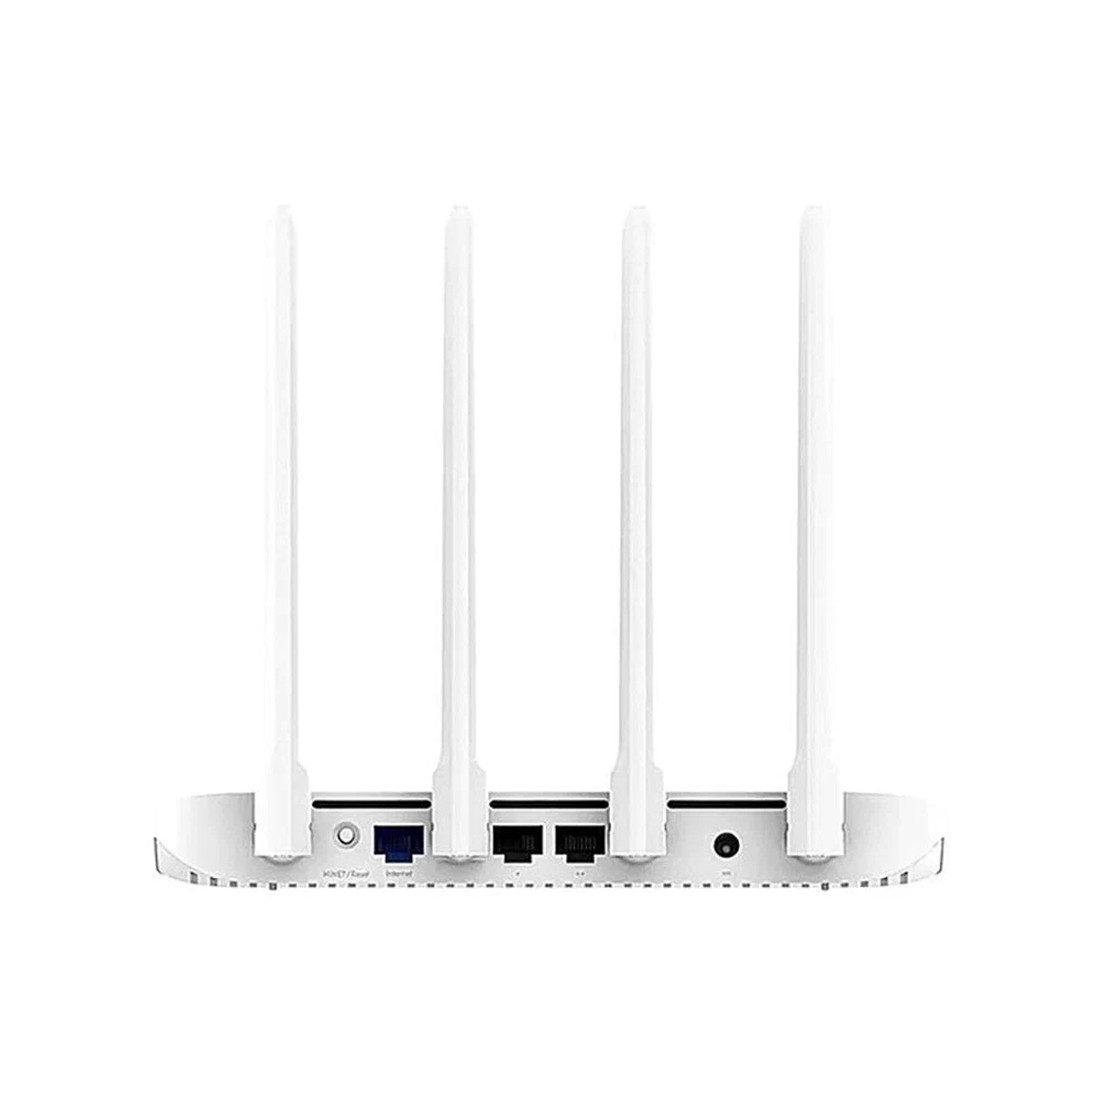 Маршрутизатор Xiaomi Router AC1200 - фото 3 - id-p112679557